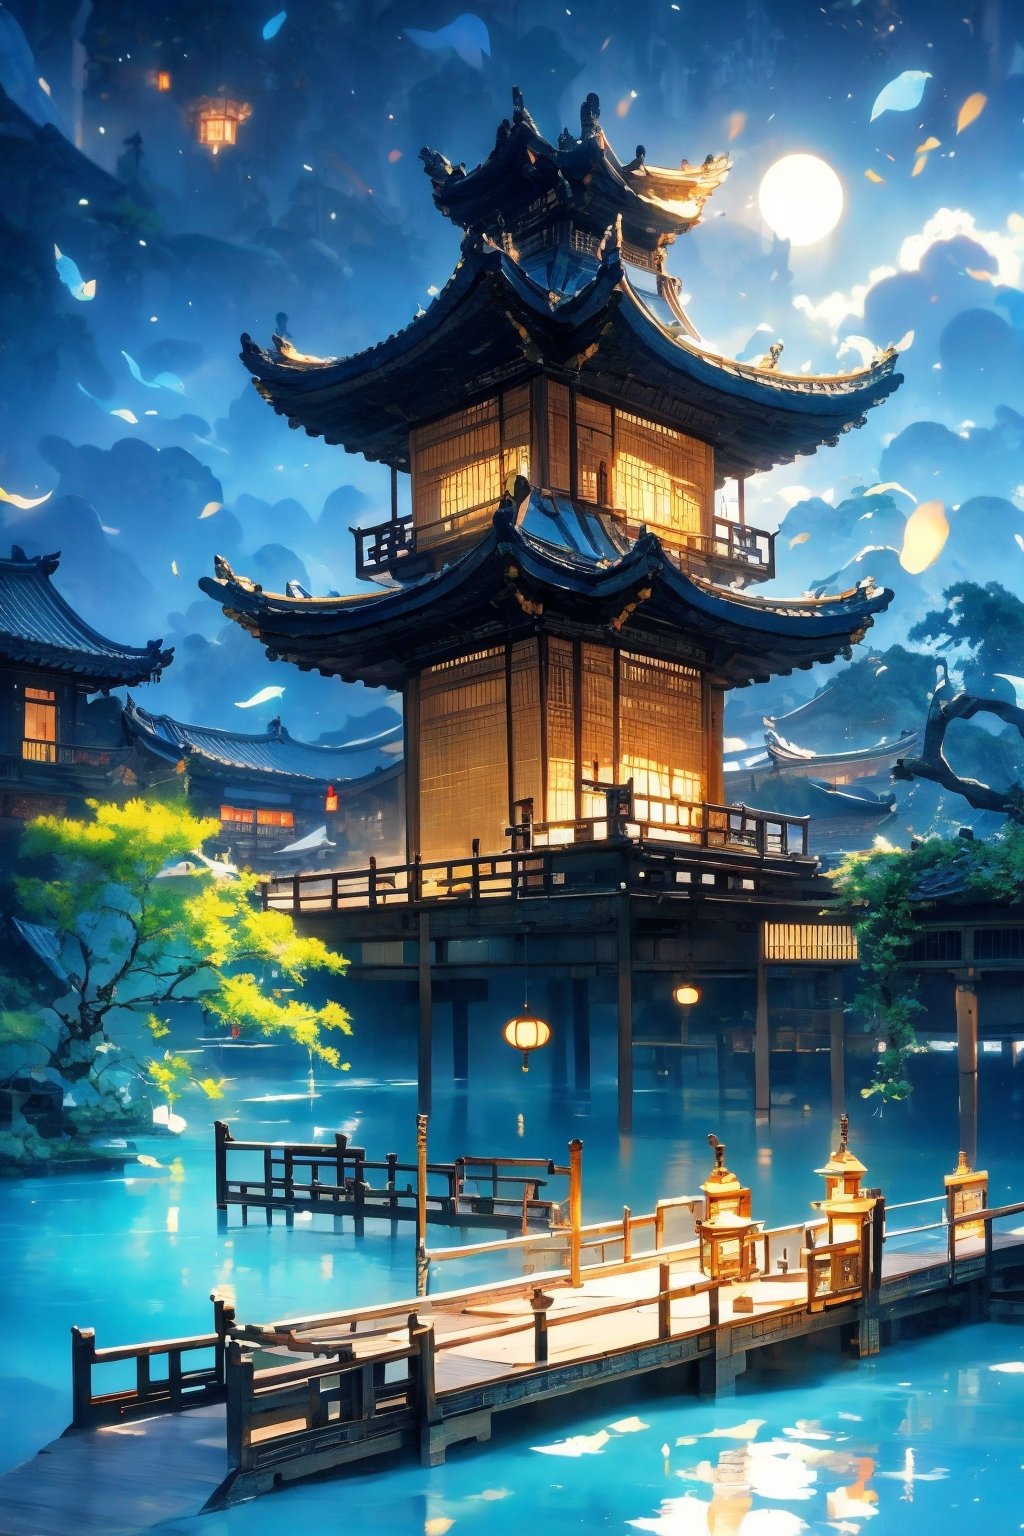 outdoors, sky, cloud, water, tree, no humans, building, scenery, reflection, lantern, stairs, architecture, east asian architecture,Chinese Architecture,blue moon, blue lotus pond,Surreal composition,Buildings scattered high and low